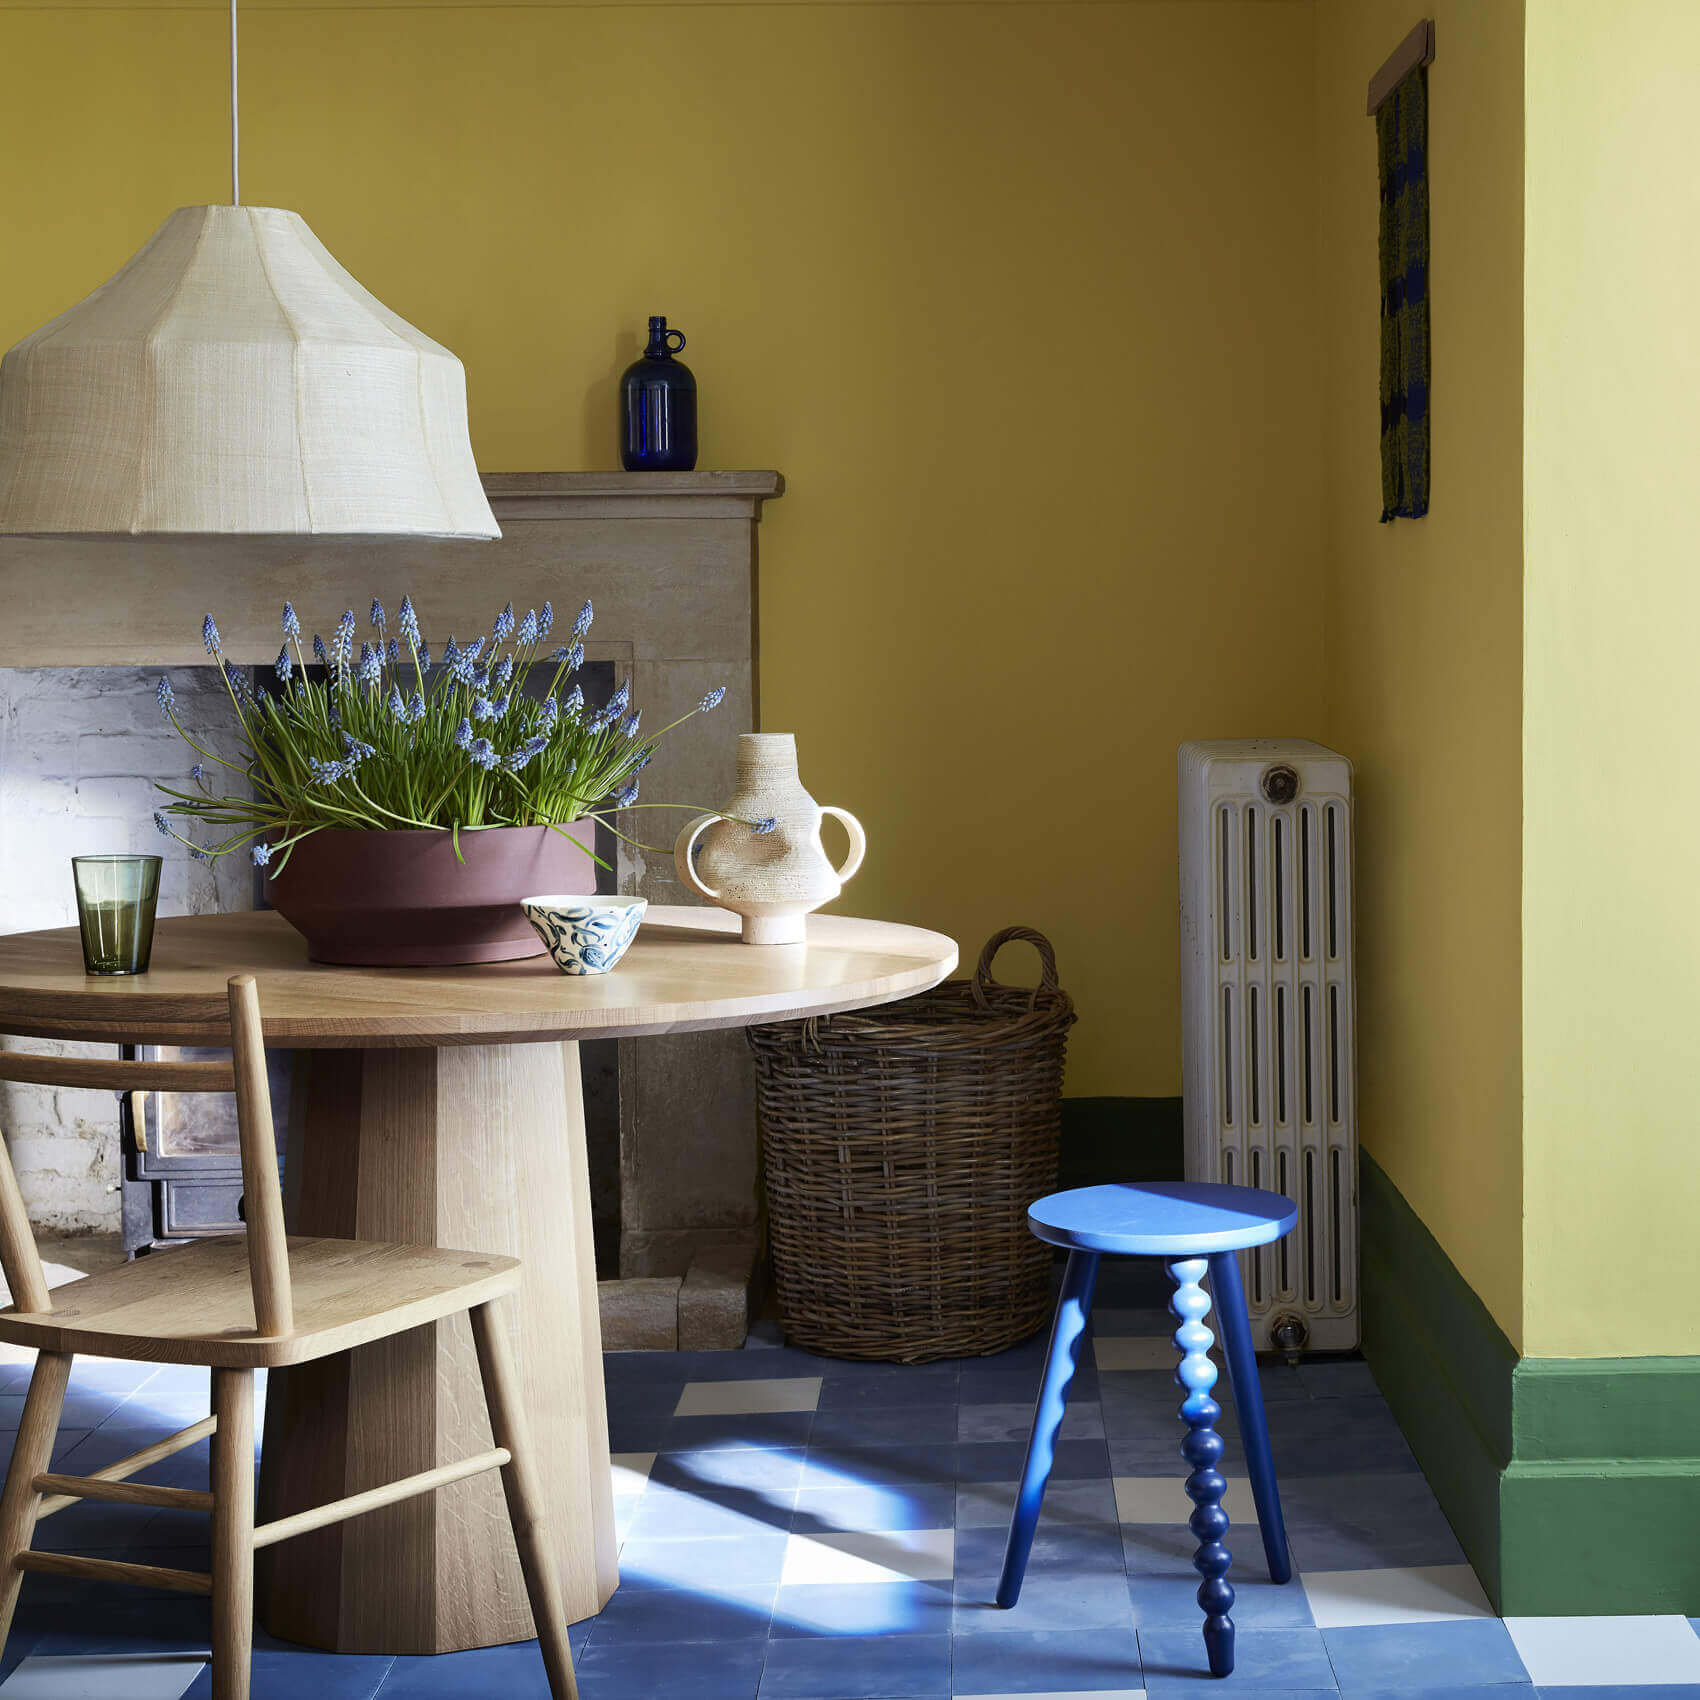 Interior paint Little Greene color yellow Indian Yellow (335).